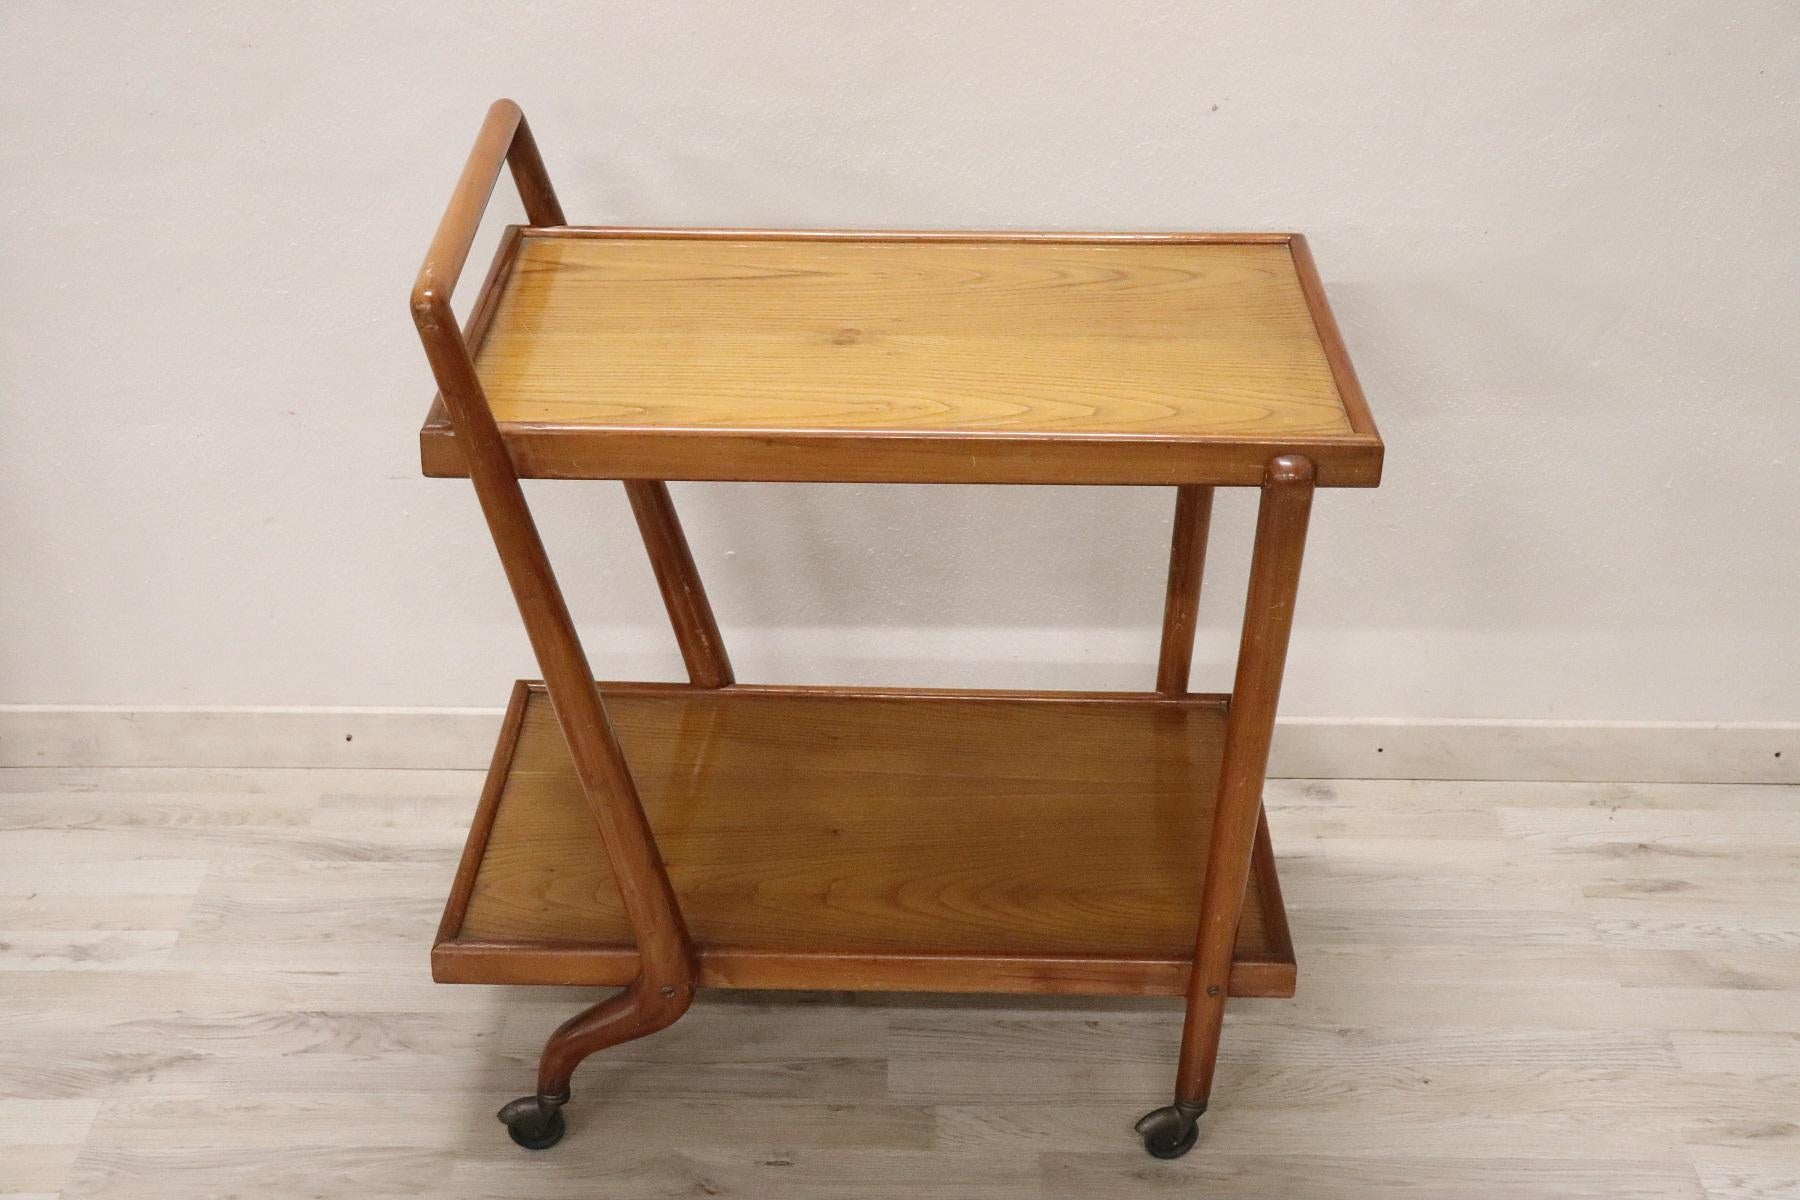 Rare drinks trolley Italian design by Paolo Buffa produced in Italy in the 1940s, It is made of beech wood.
The table have been used conditions. We can provide in our Italian professional laboratories for the complete restoration of wood. You can